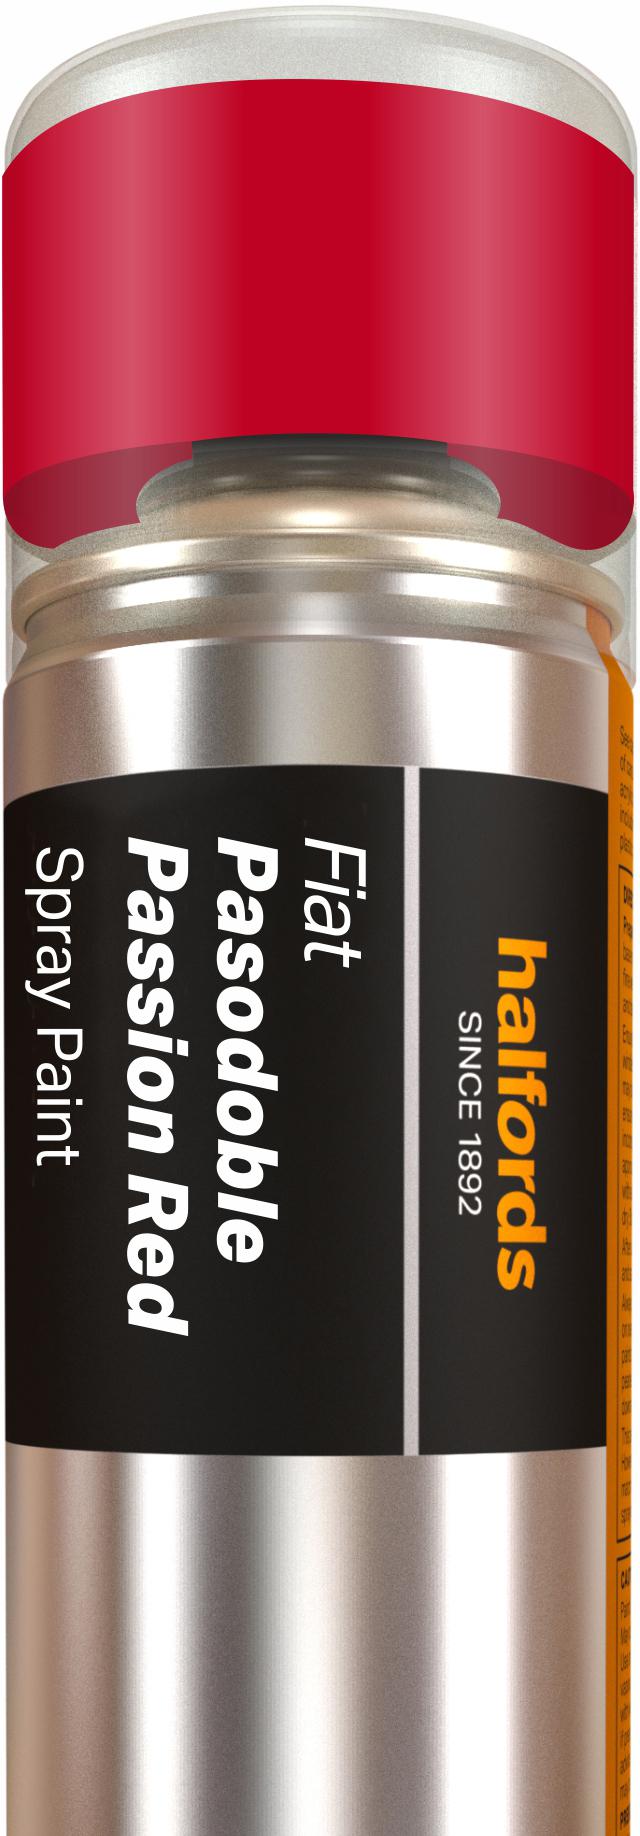 Halfords Fiat Pasodoble/Passion Red Car Spray Paint 300Ml